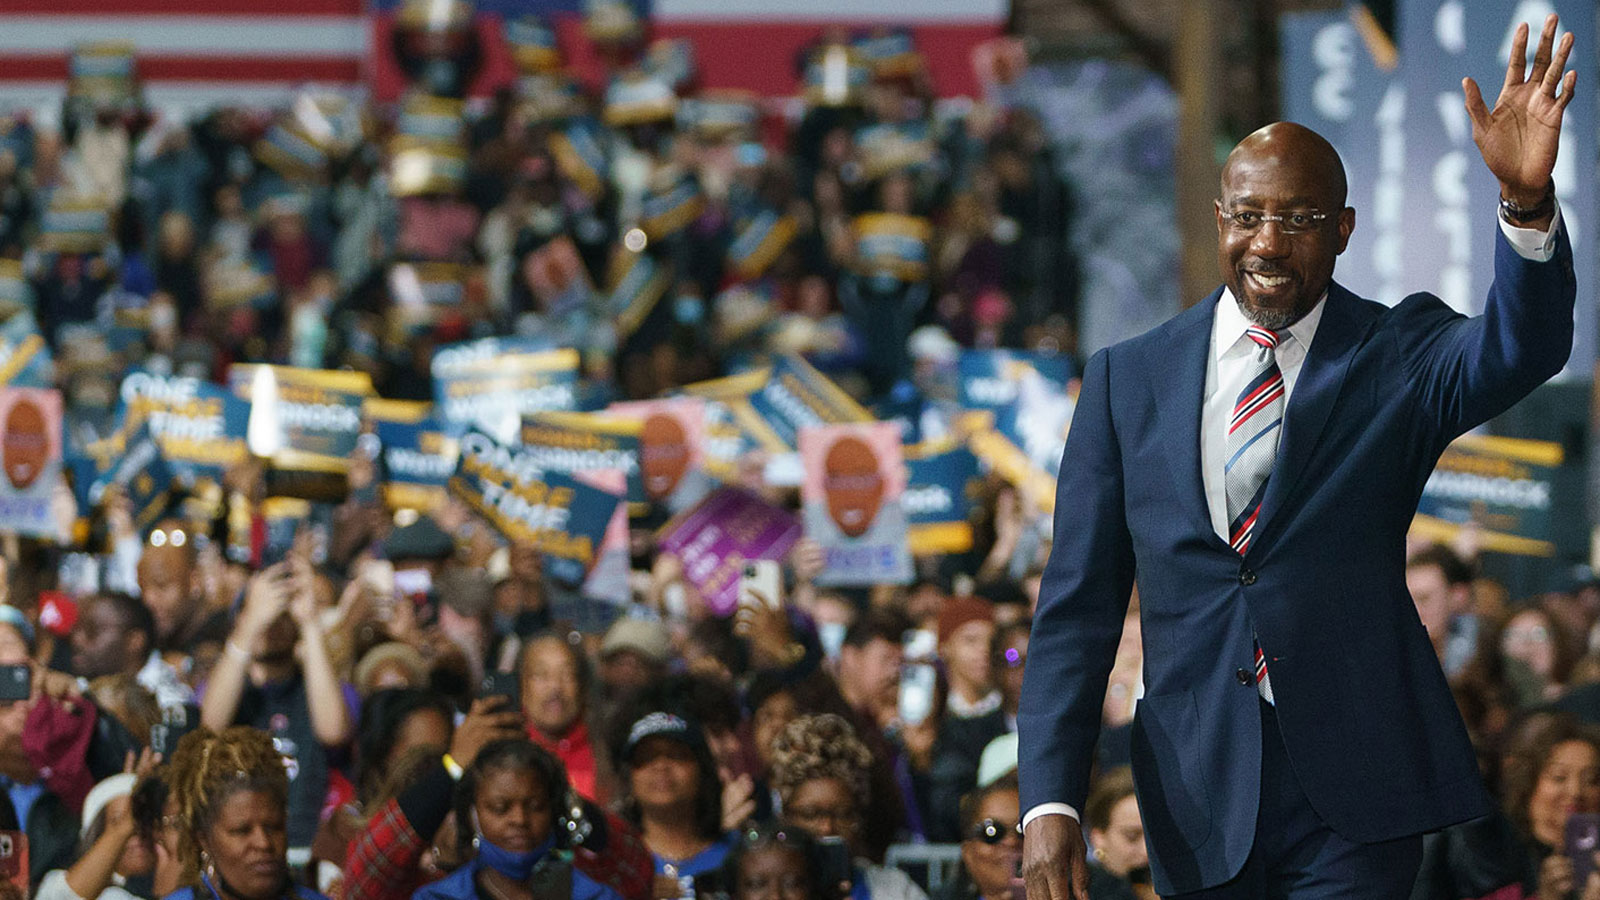 U.S. Sen. Raphael Warnock takes the stage at a campaign rally in Atlanta on Thursday.